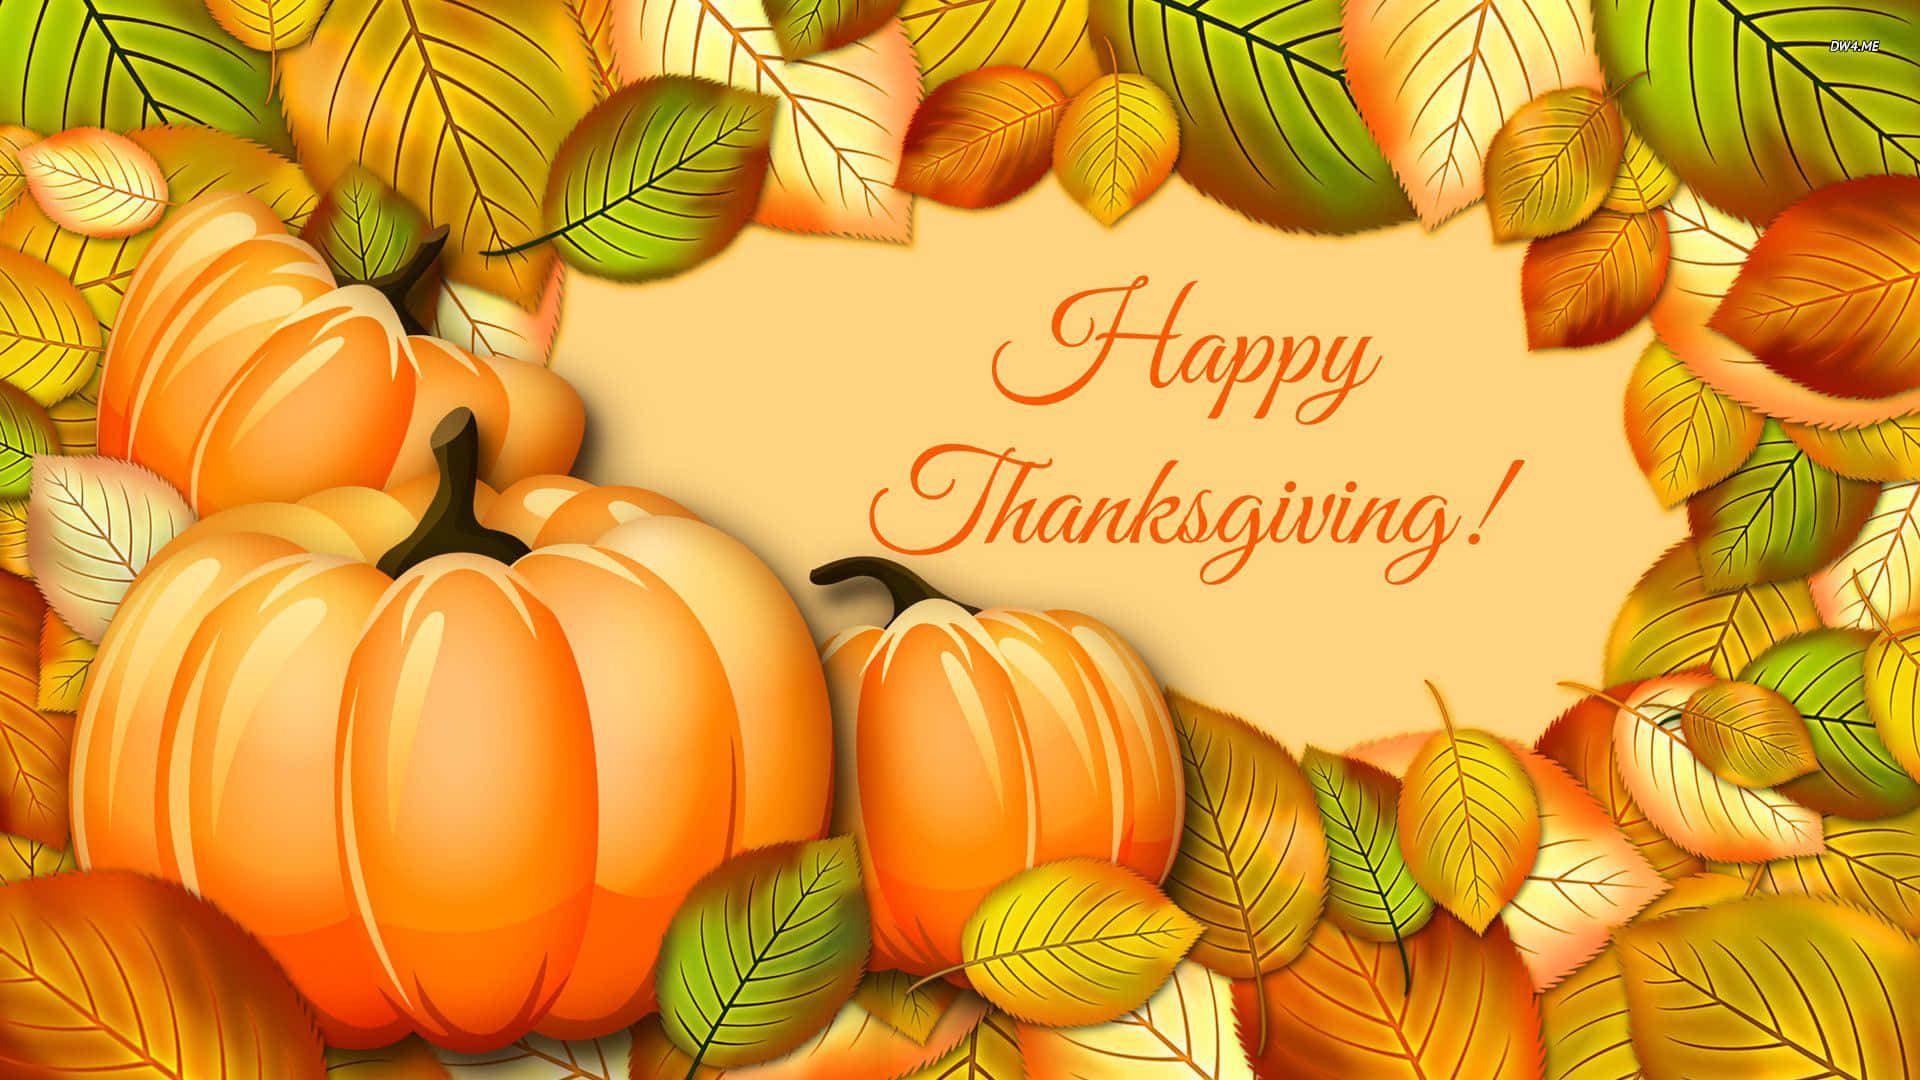 Have a Happy Thanksgiving! Wallpaper